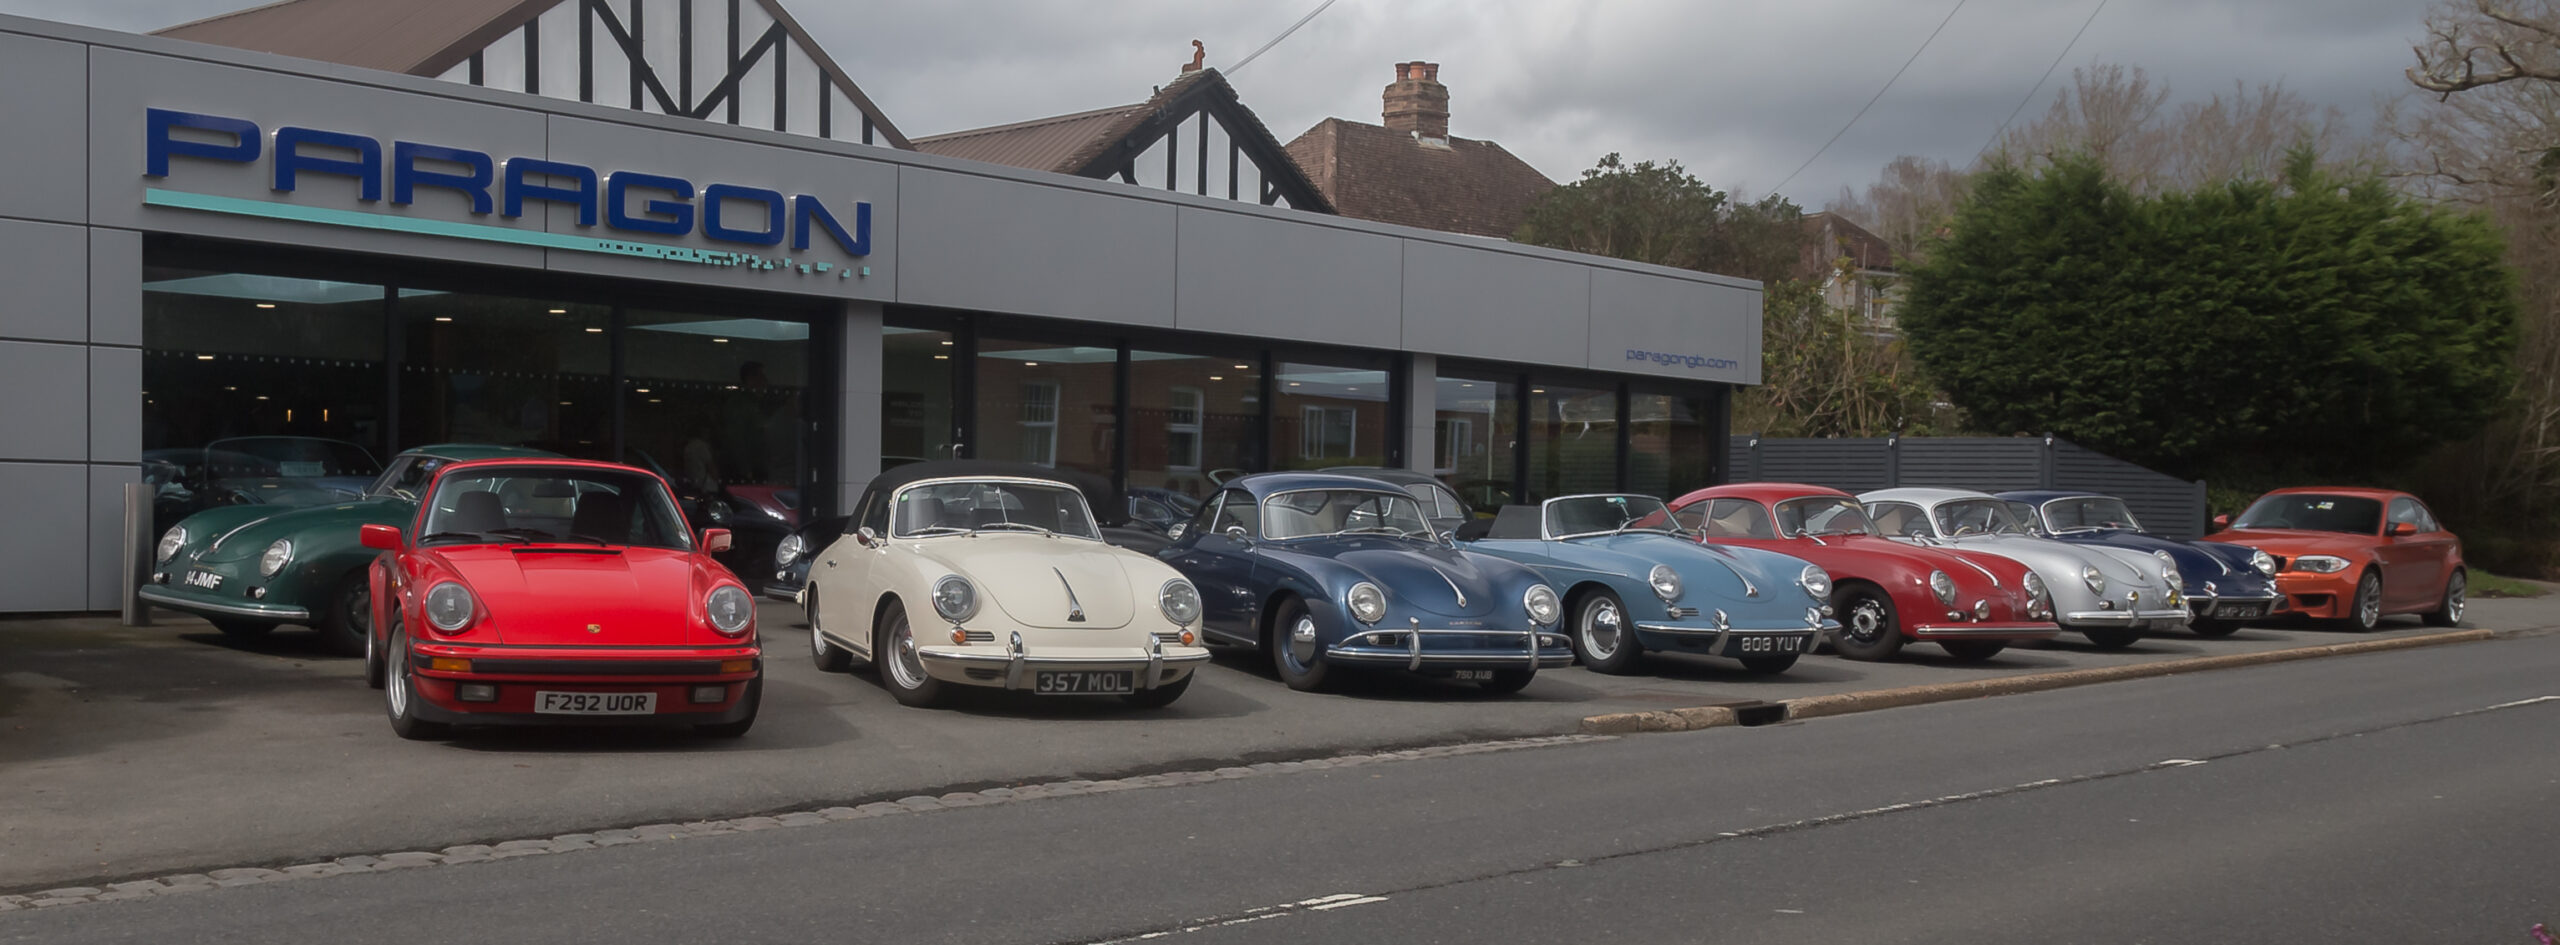 Classic Porsche sports cars lined up in front of Paragon Porsche dealership